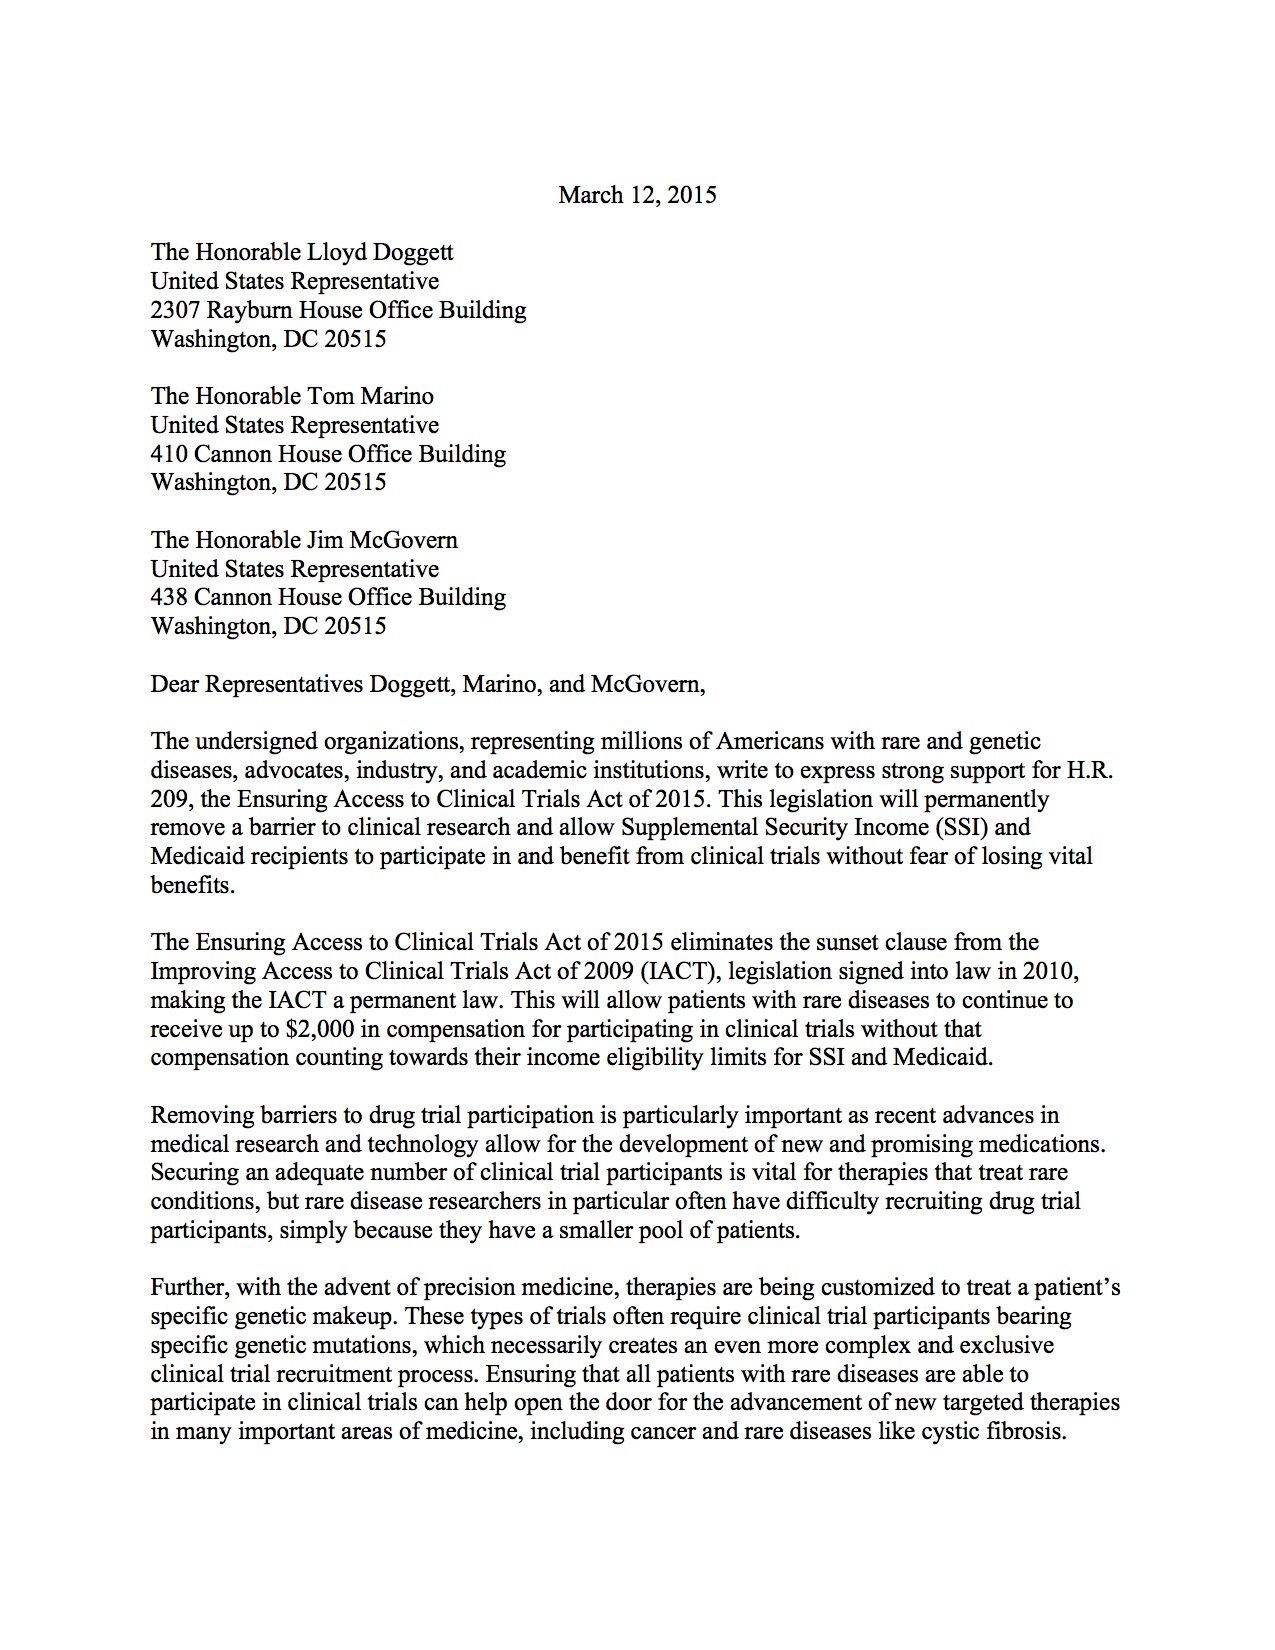 House Coalition Letter FINAL March 2015